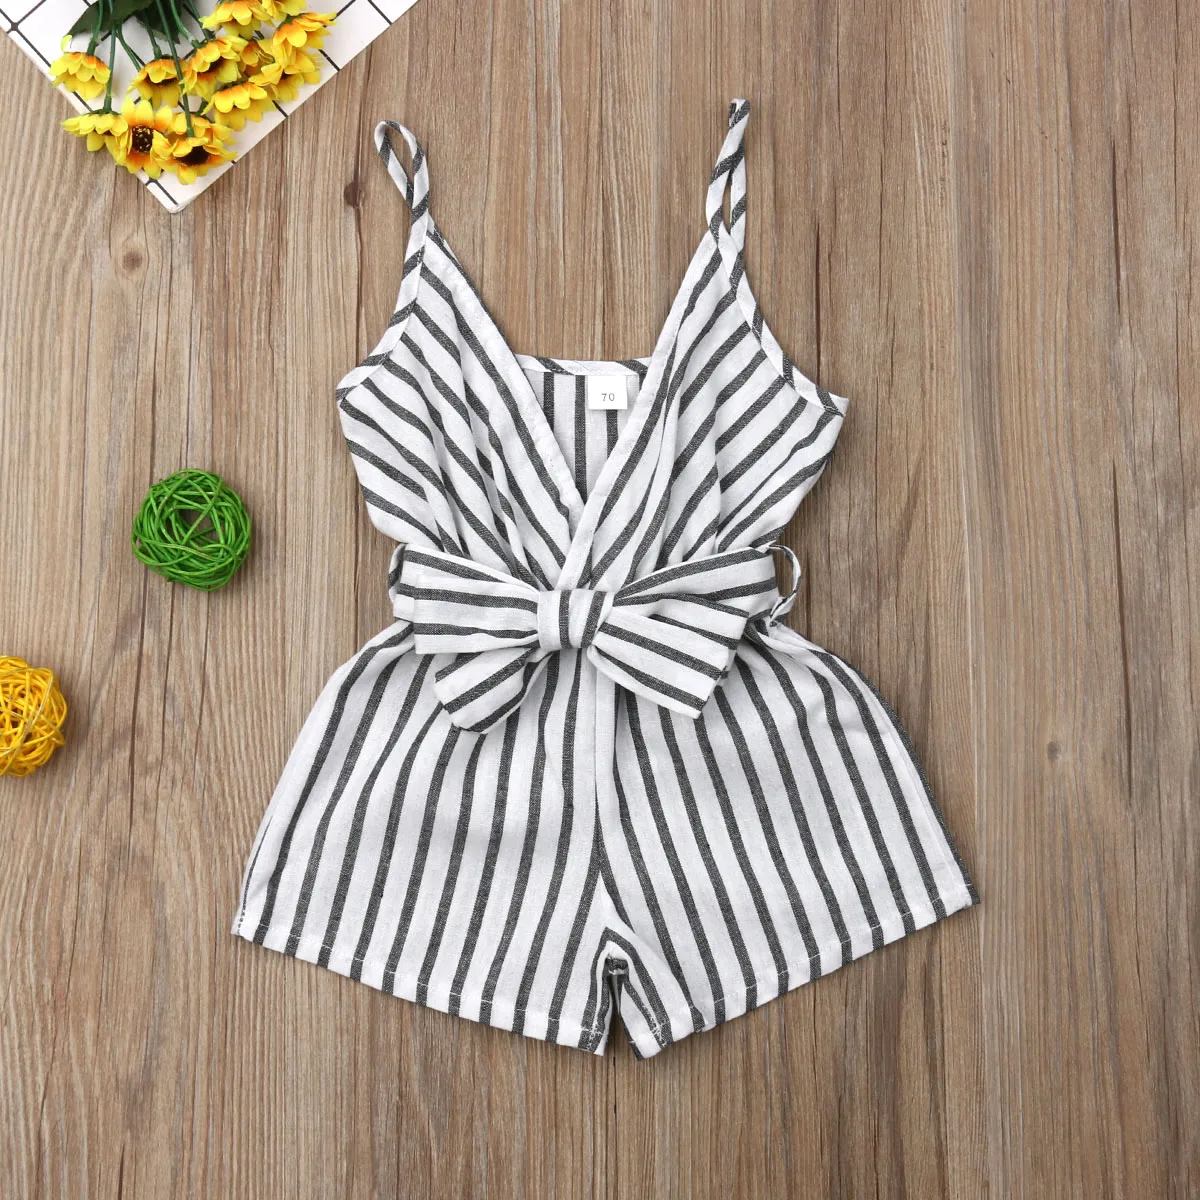 

Emmababy Summer Newborn Baby Girl Clothes Sleeveless Striped Bowknot Strap Romper Jumpsuit Outfit Sunsuit Clothes